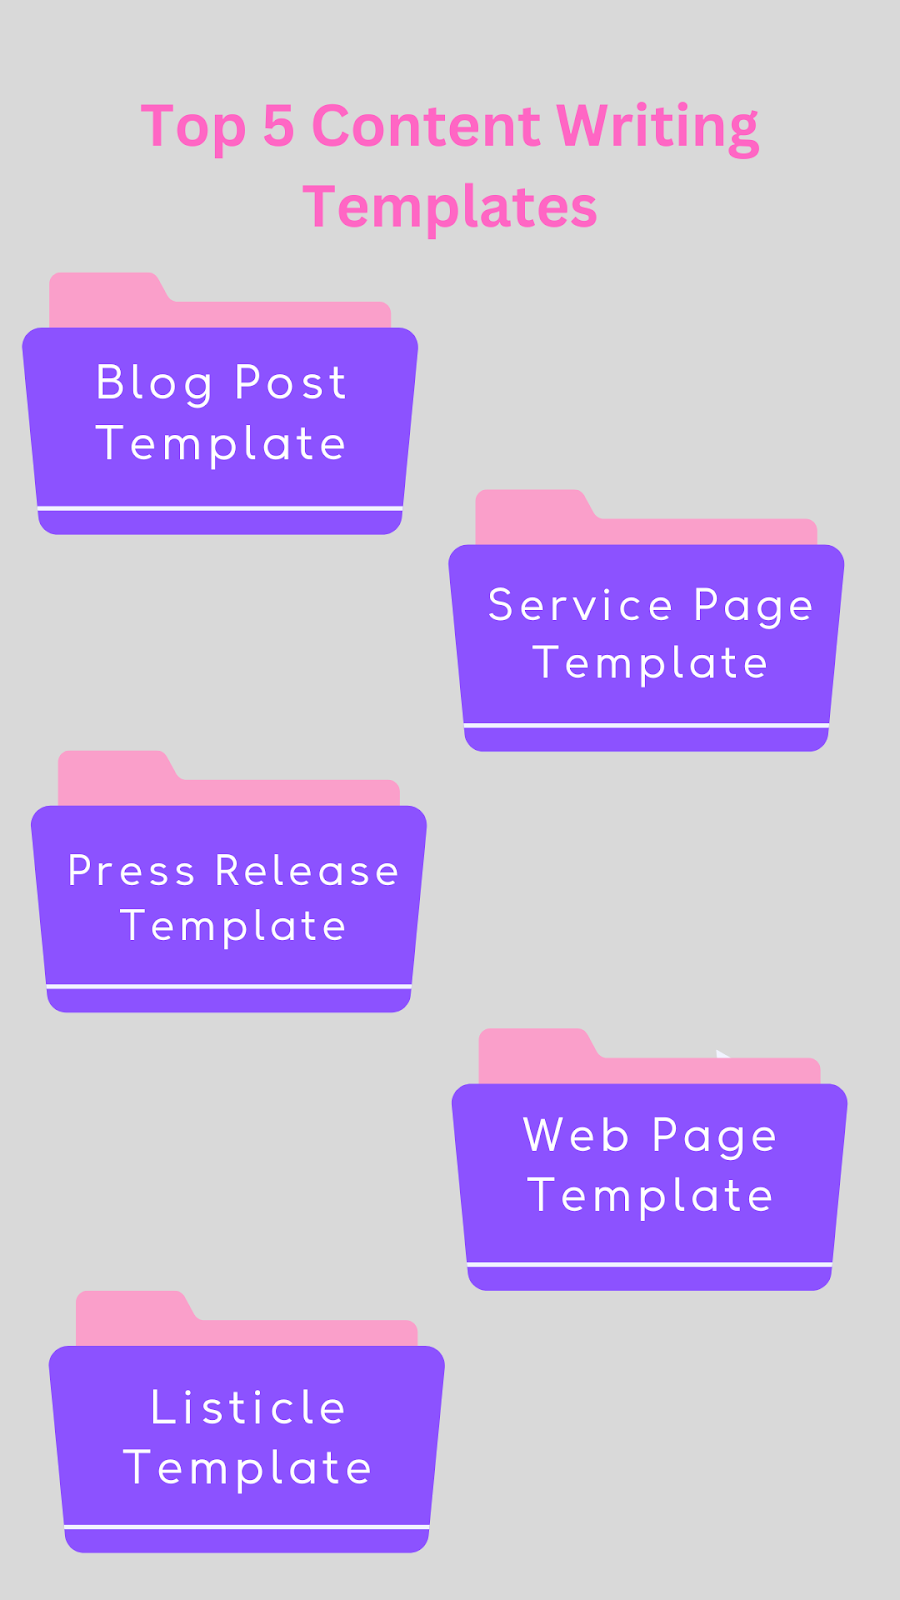 Illustration of Top 5 Content Writing Templates